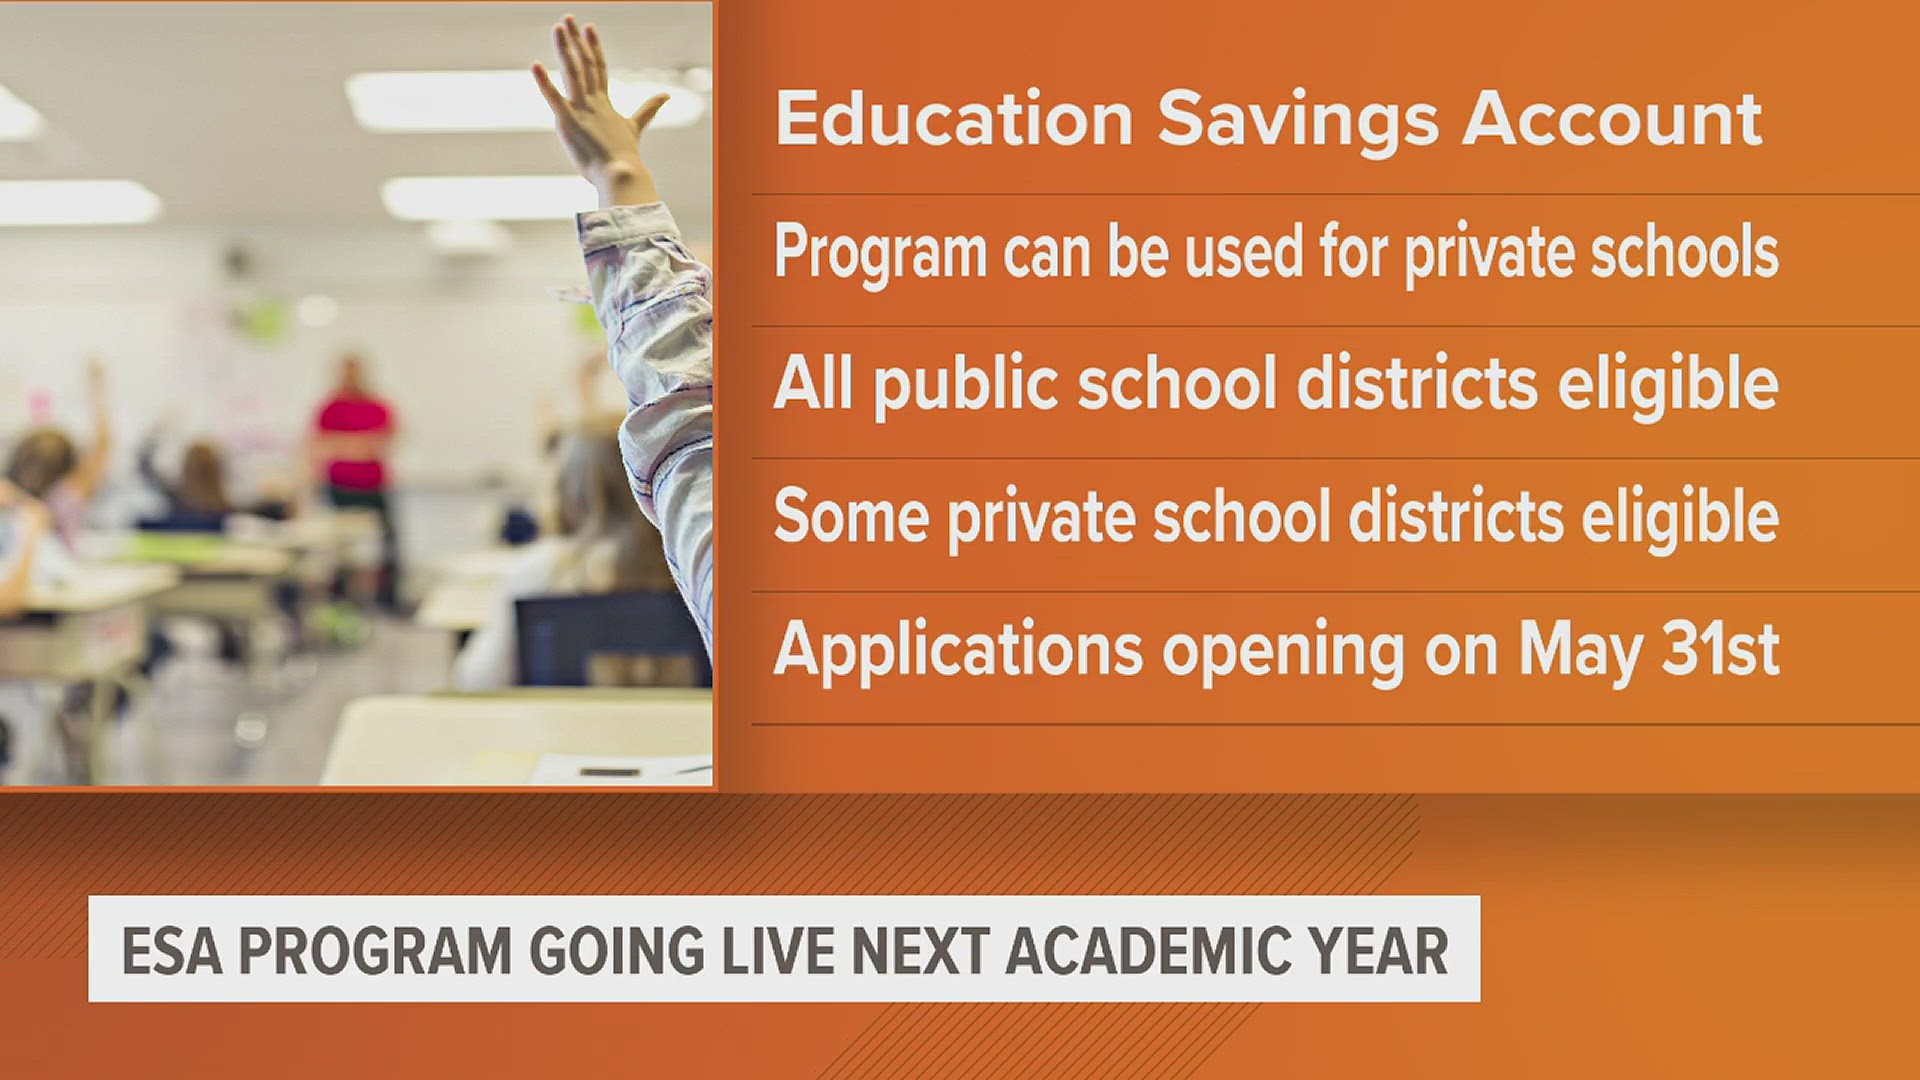 Every child currently enrolled in a public school is eligible for the program.